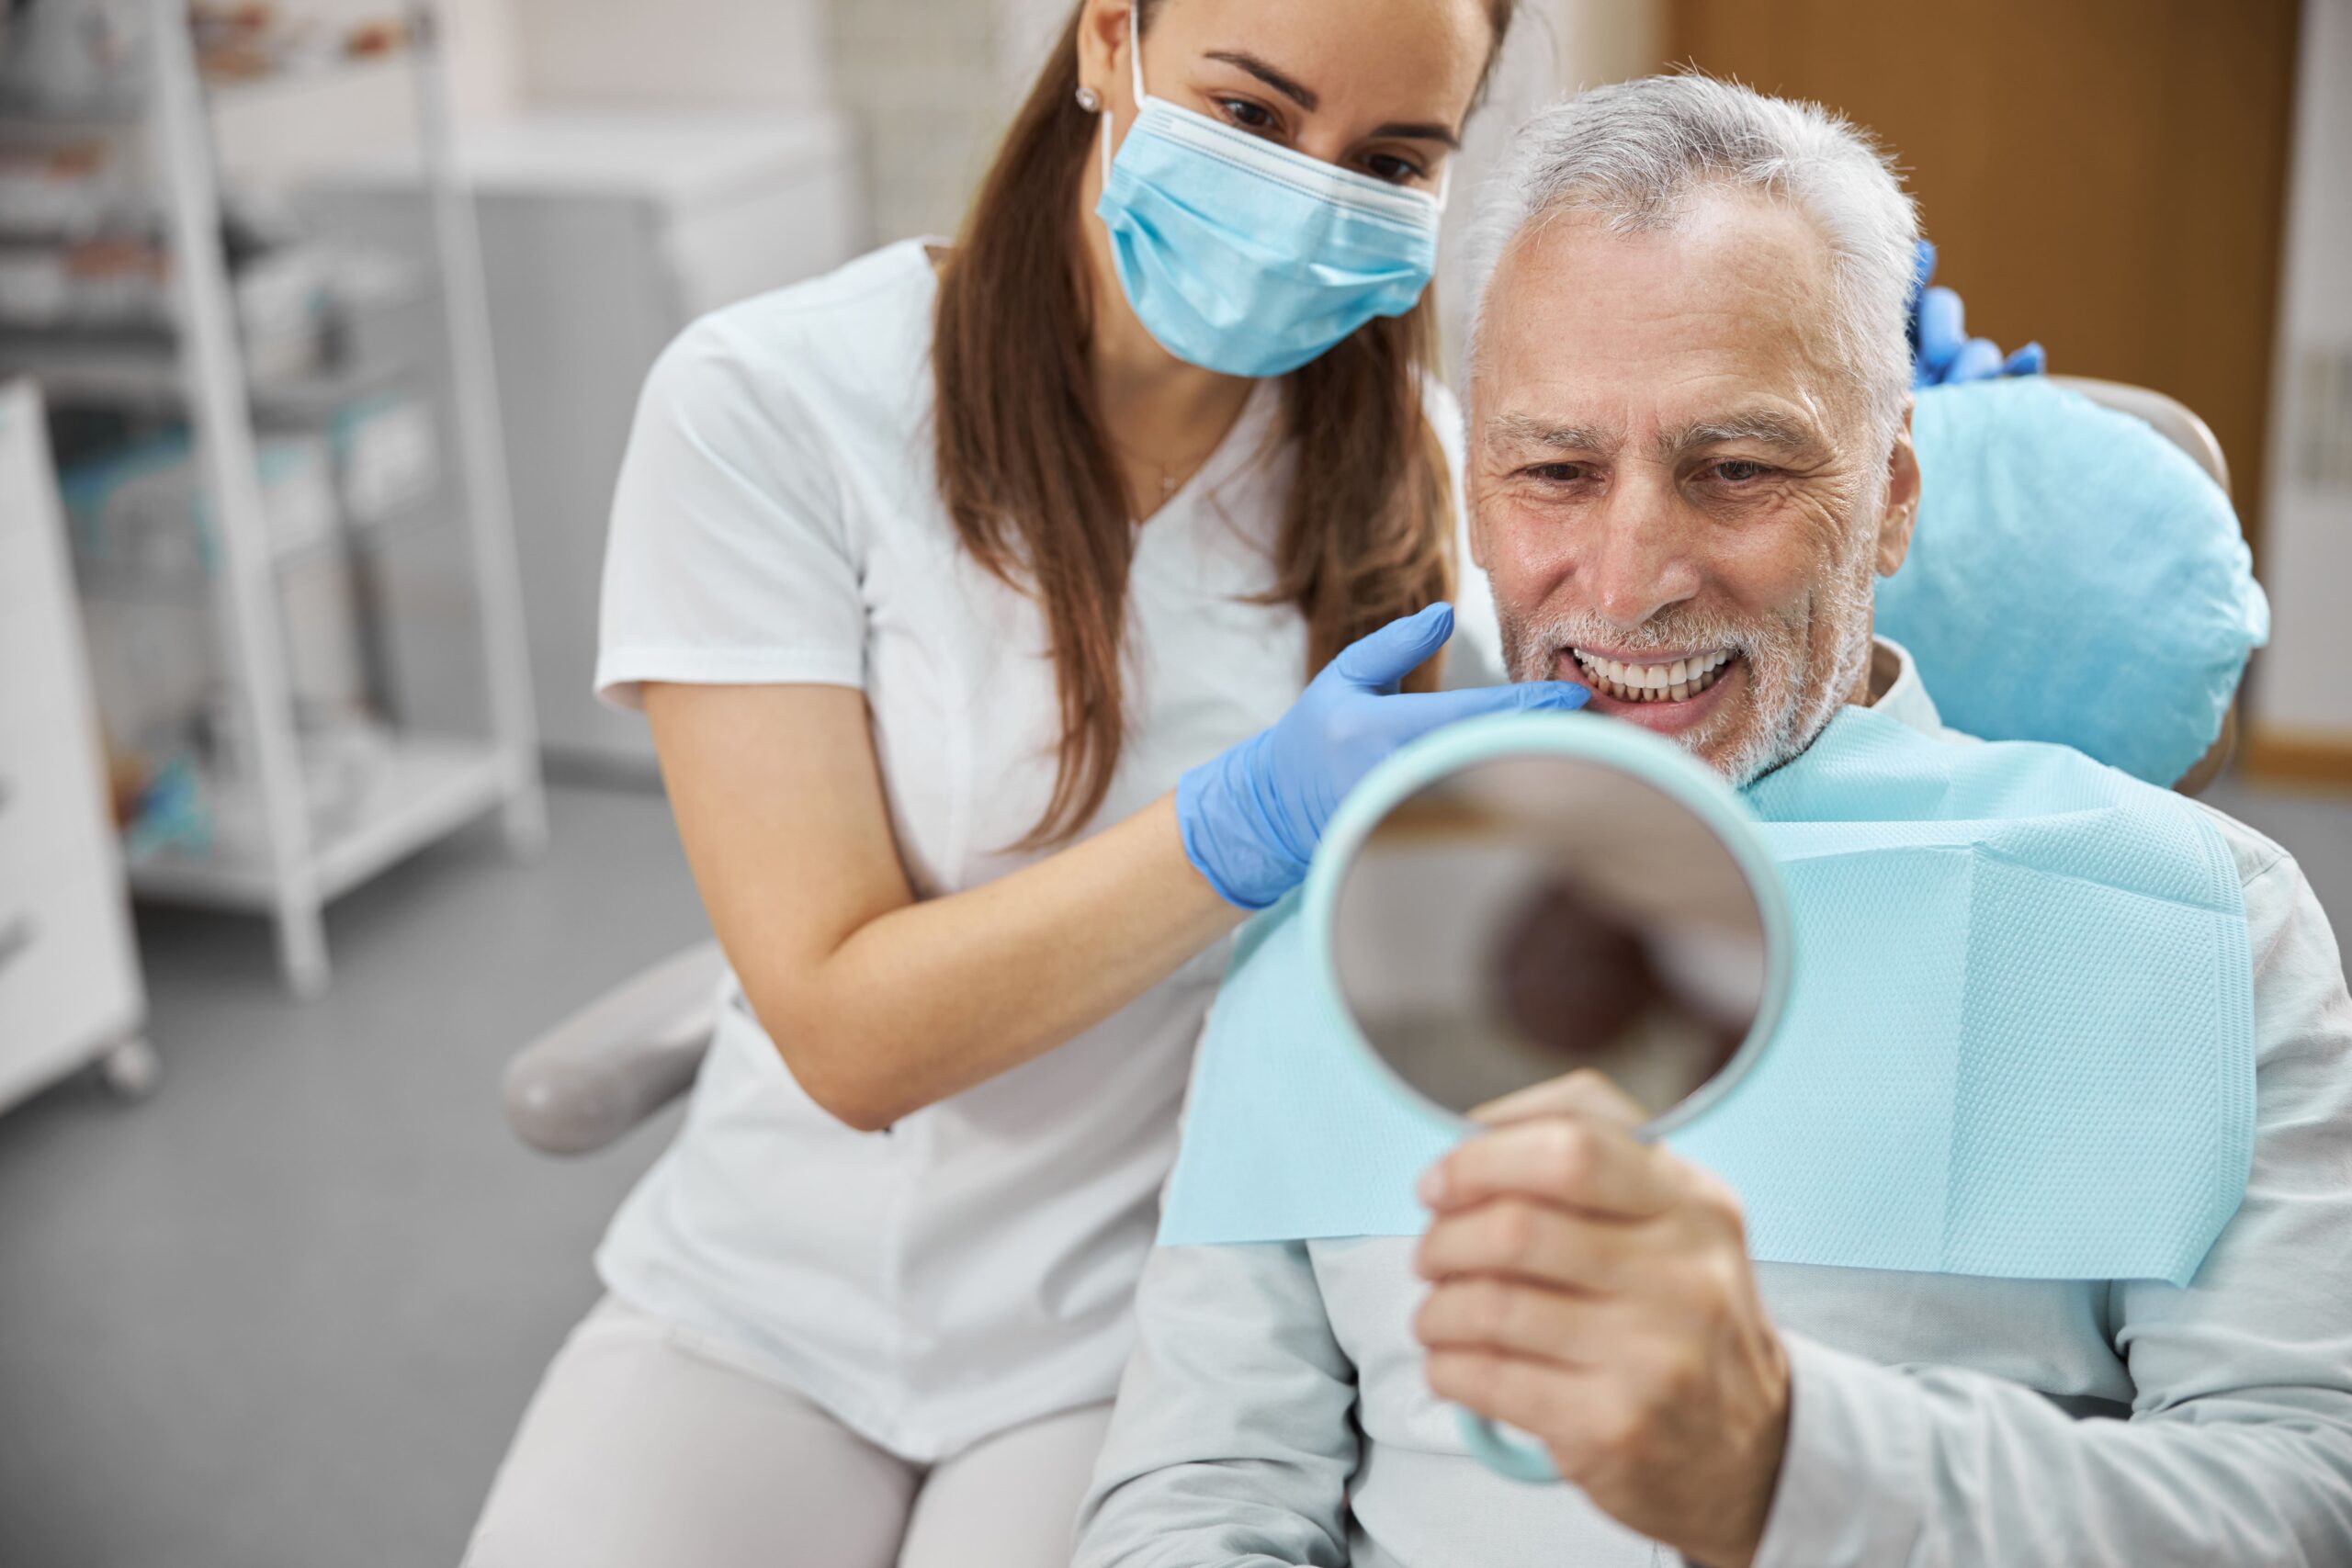 Dental Implants vs. Dentures: Which is Right for You?